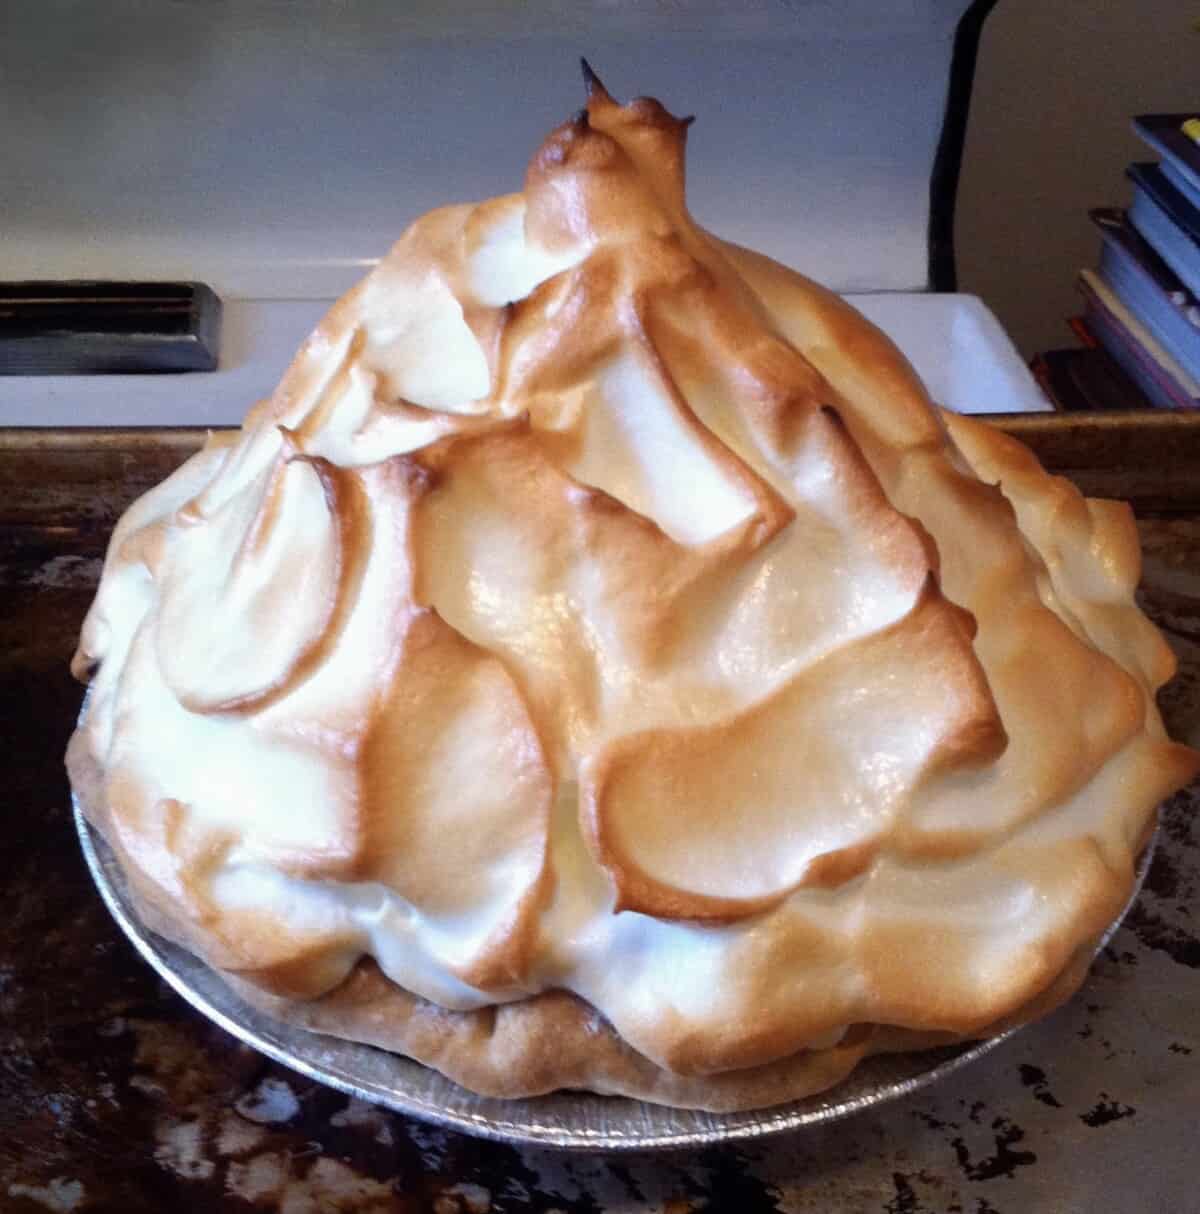 a true mile-high double meringue topping on a homemade lemon meringue pie I made